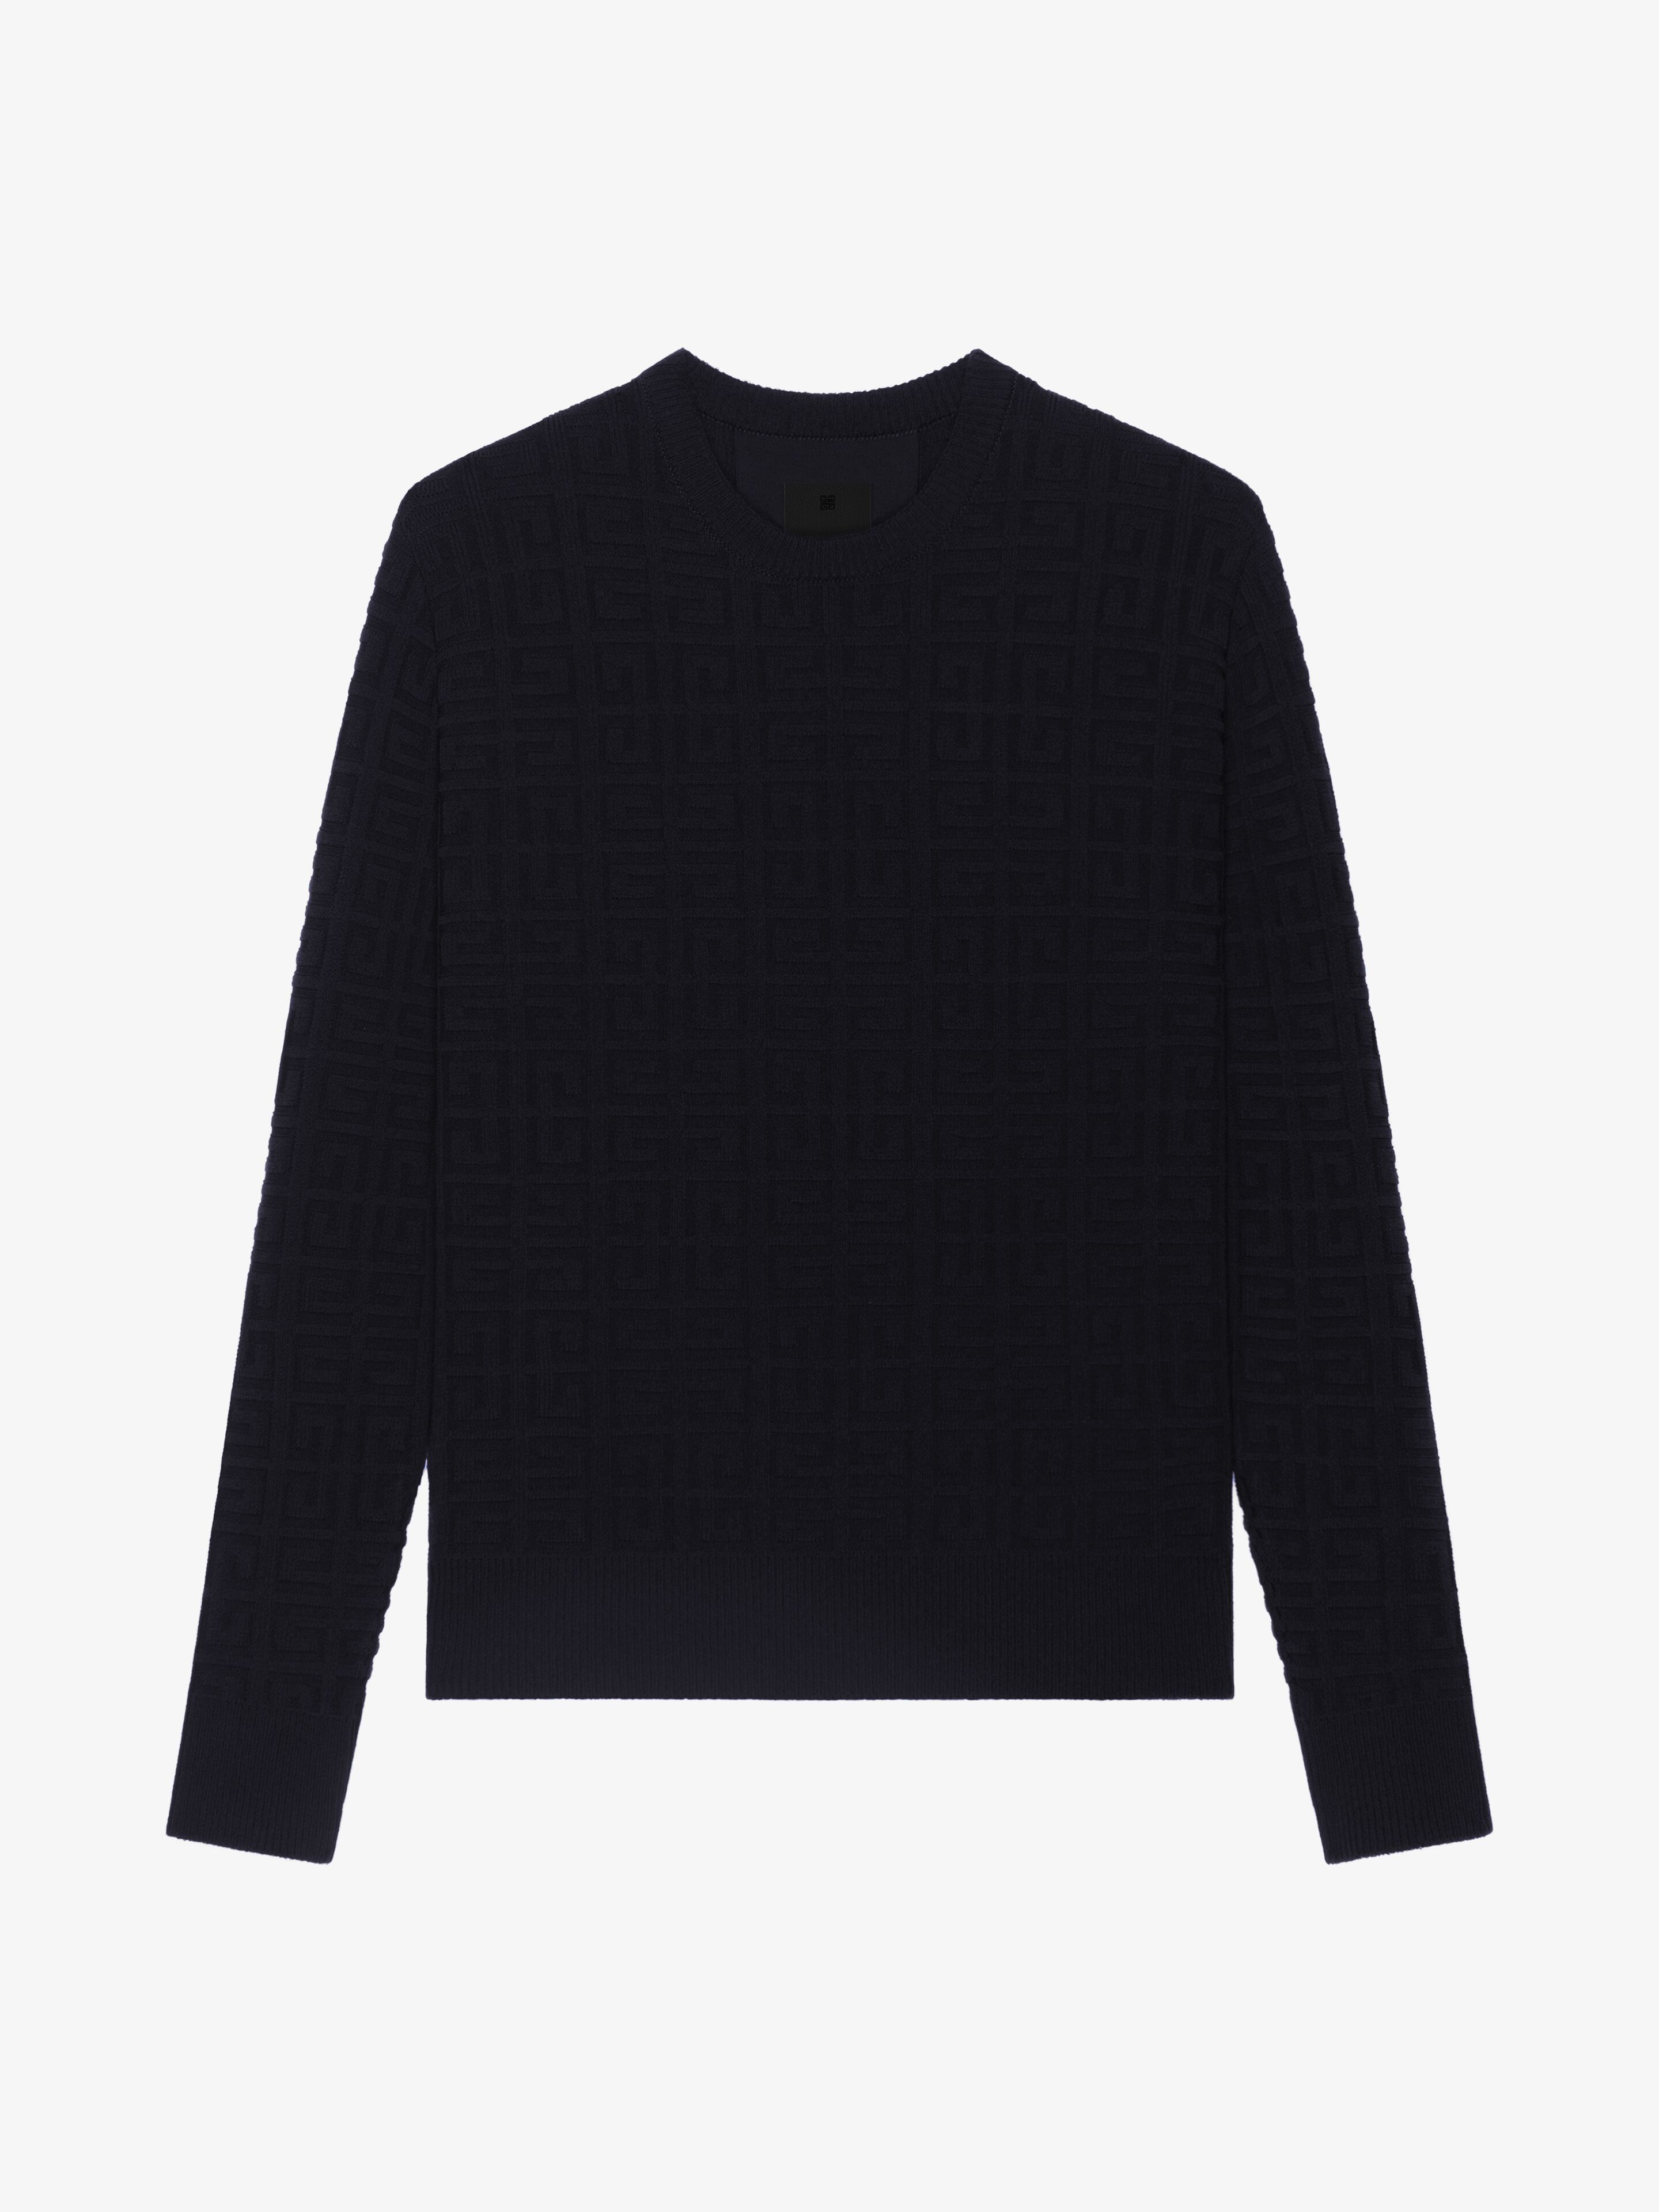 Love Lock crewneck sweater in black - Givenchy